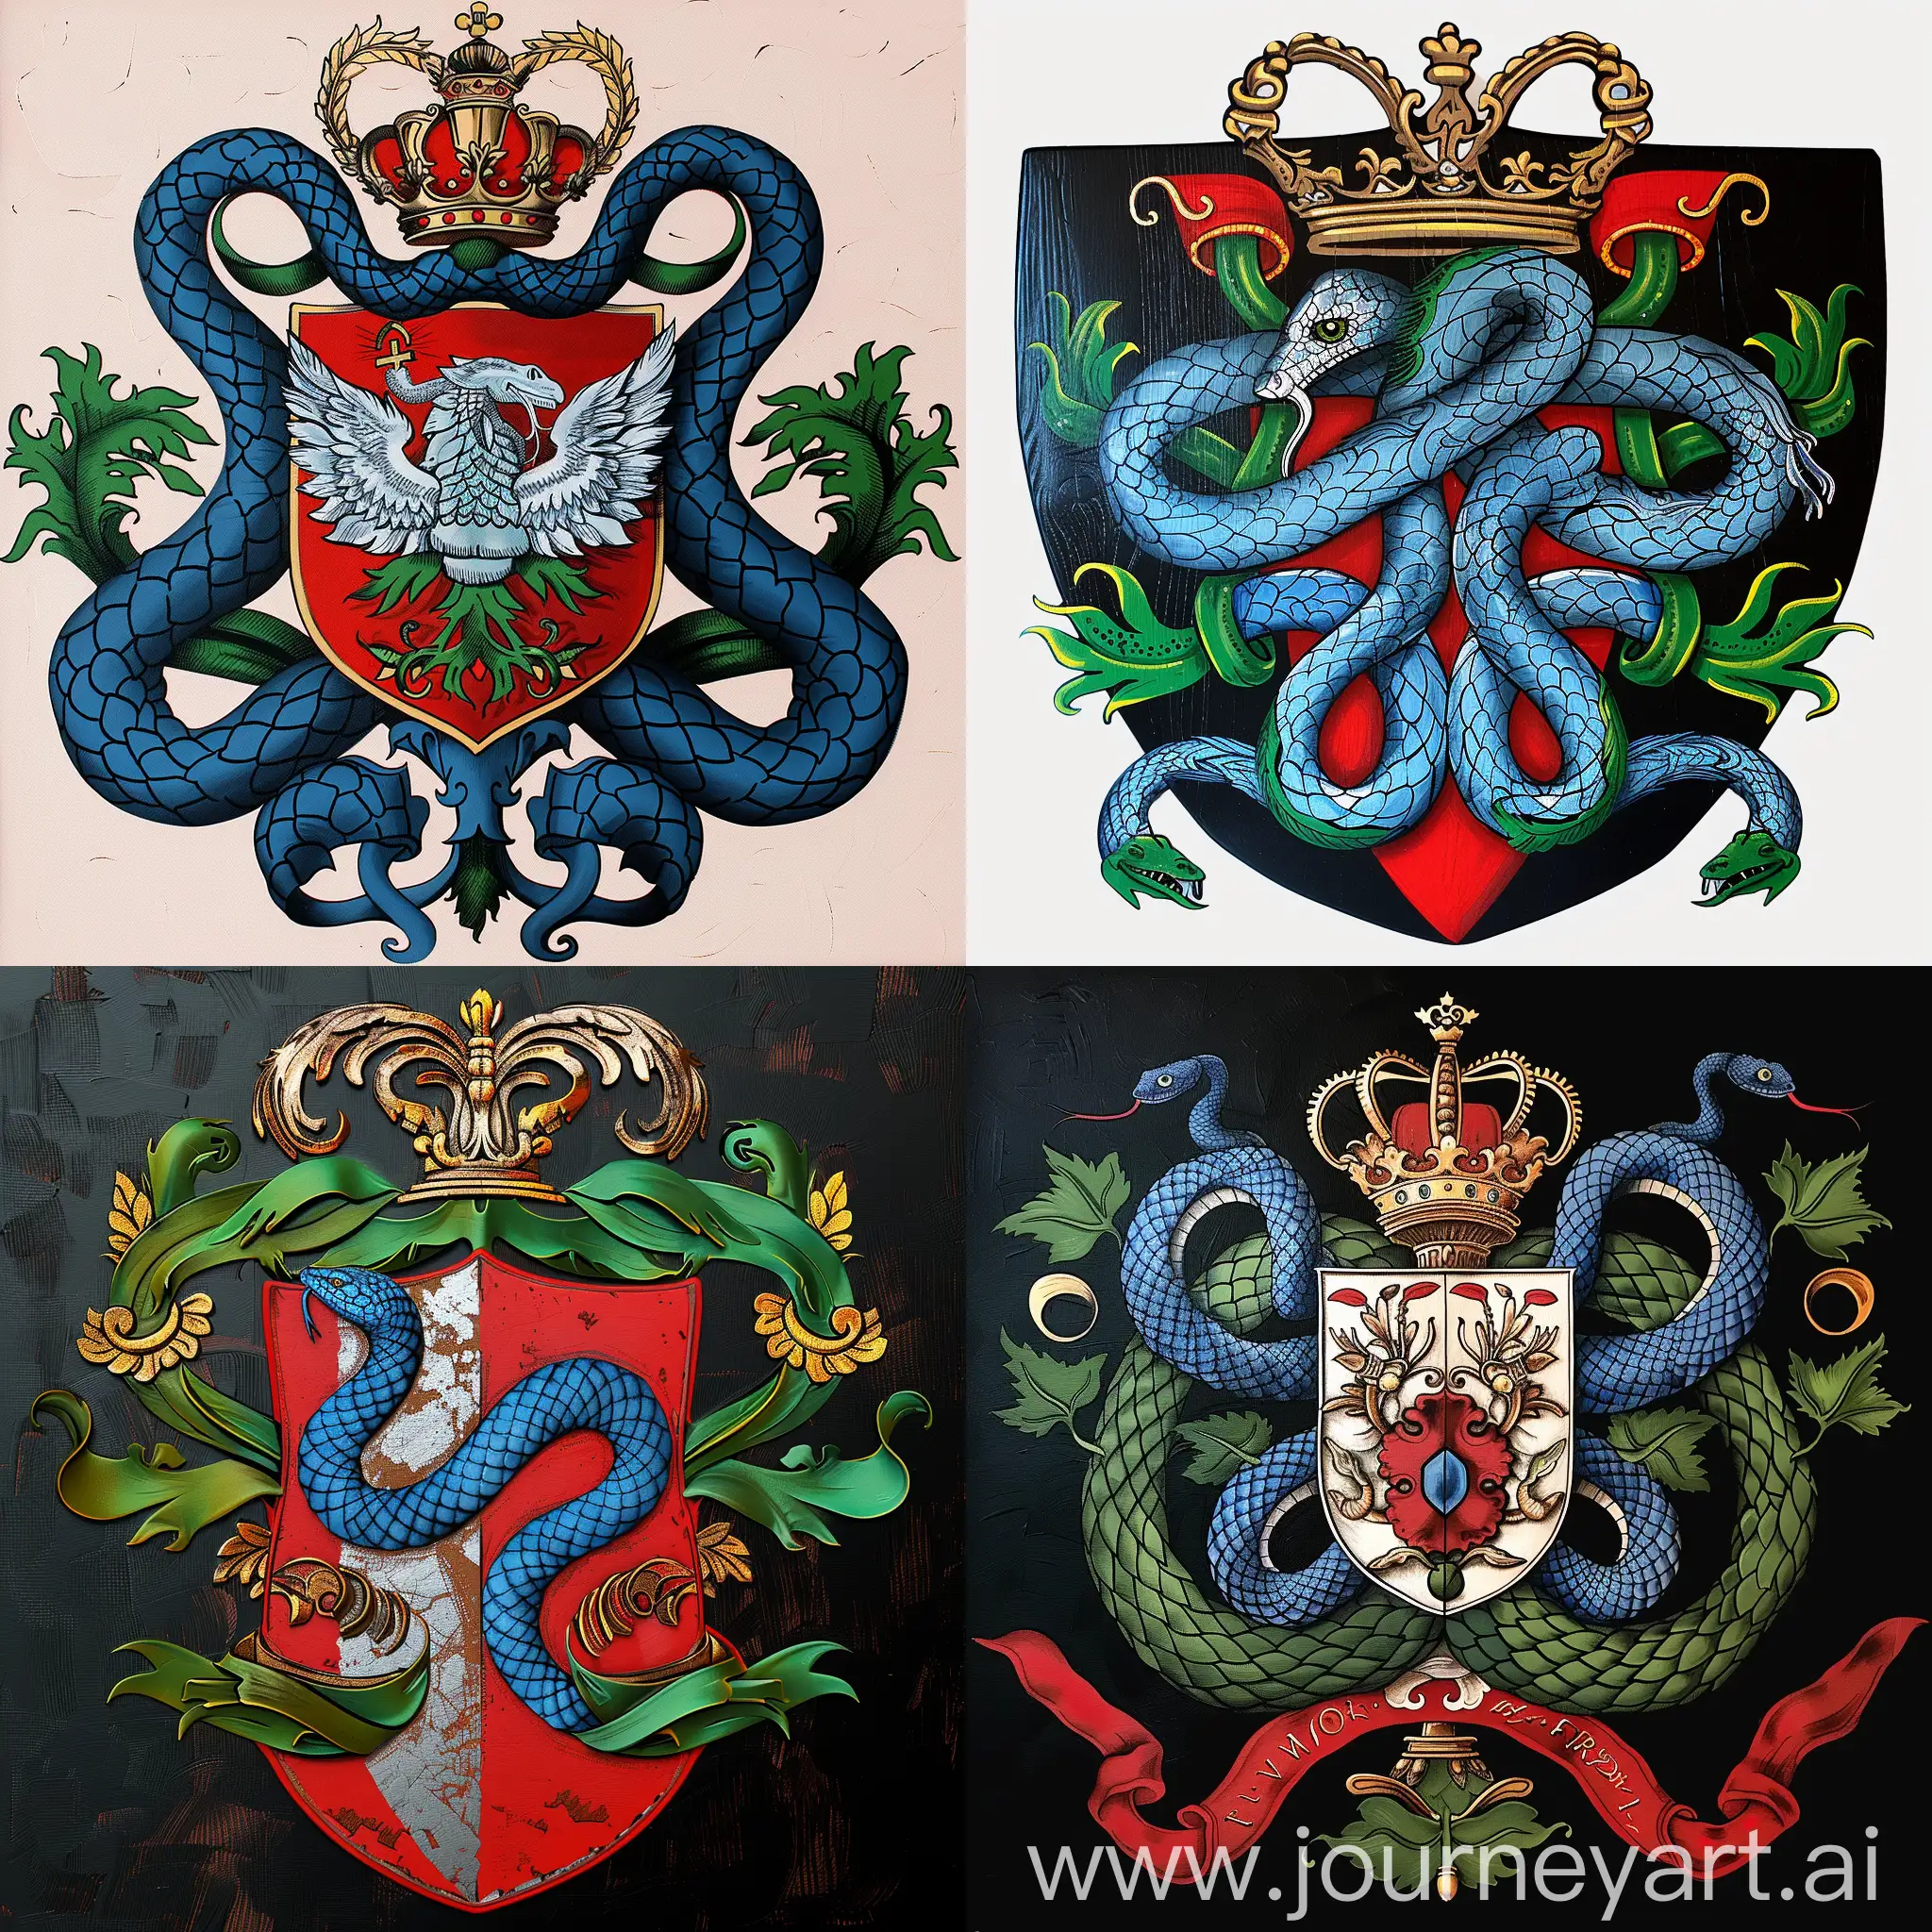 Minimalistic-Coat-of-Arms-with-a-Blue-Snake